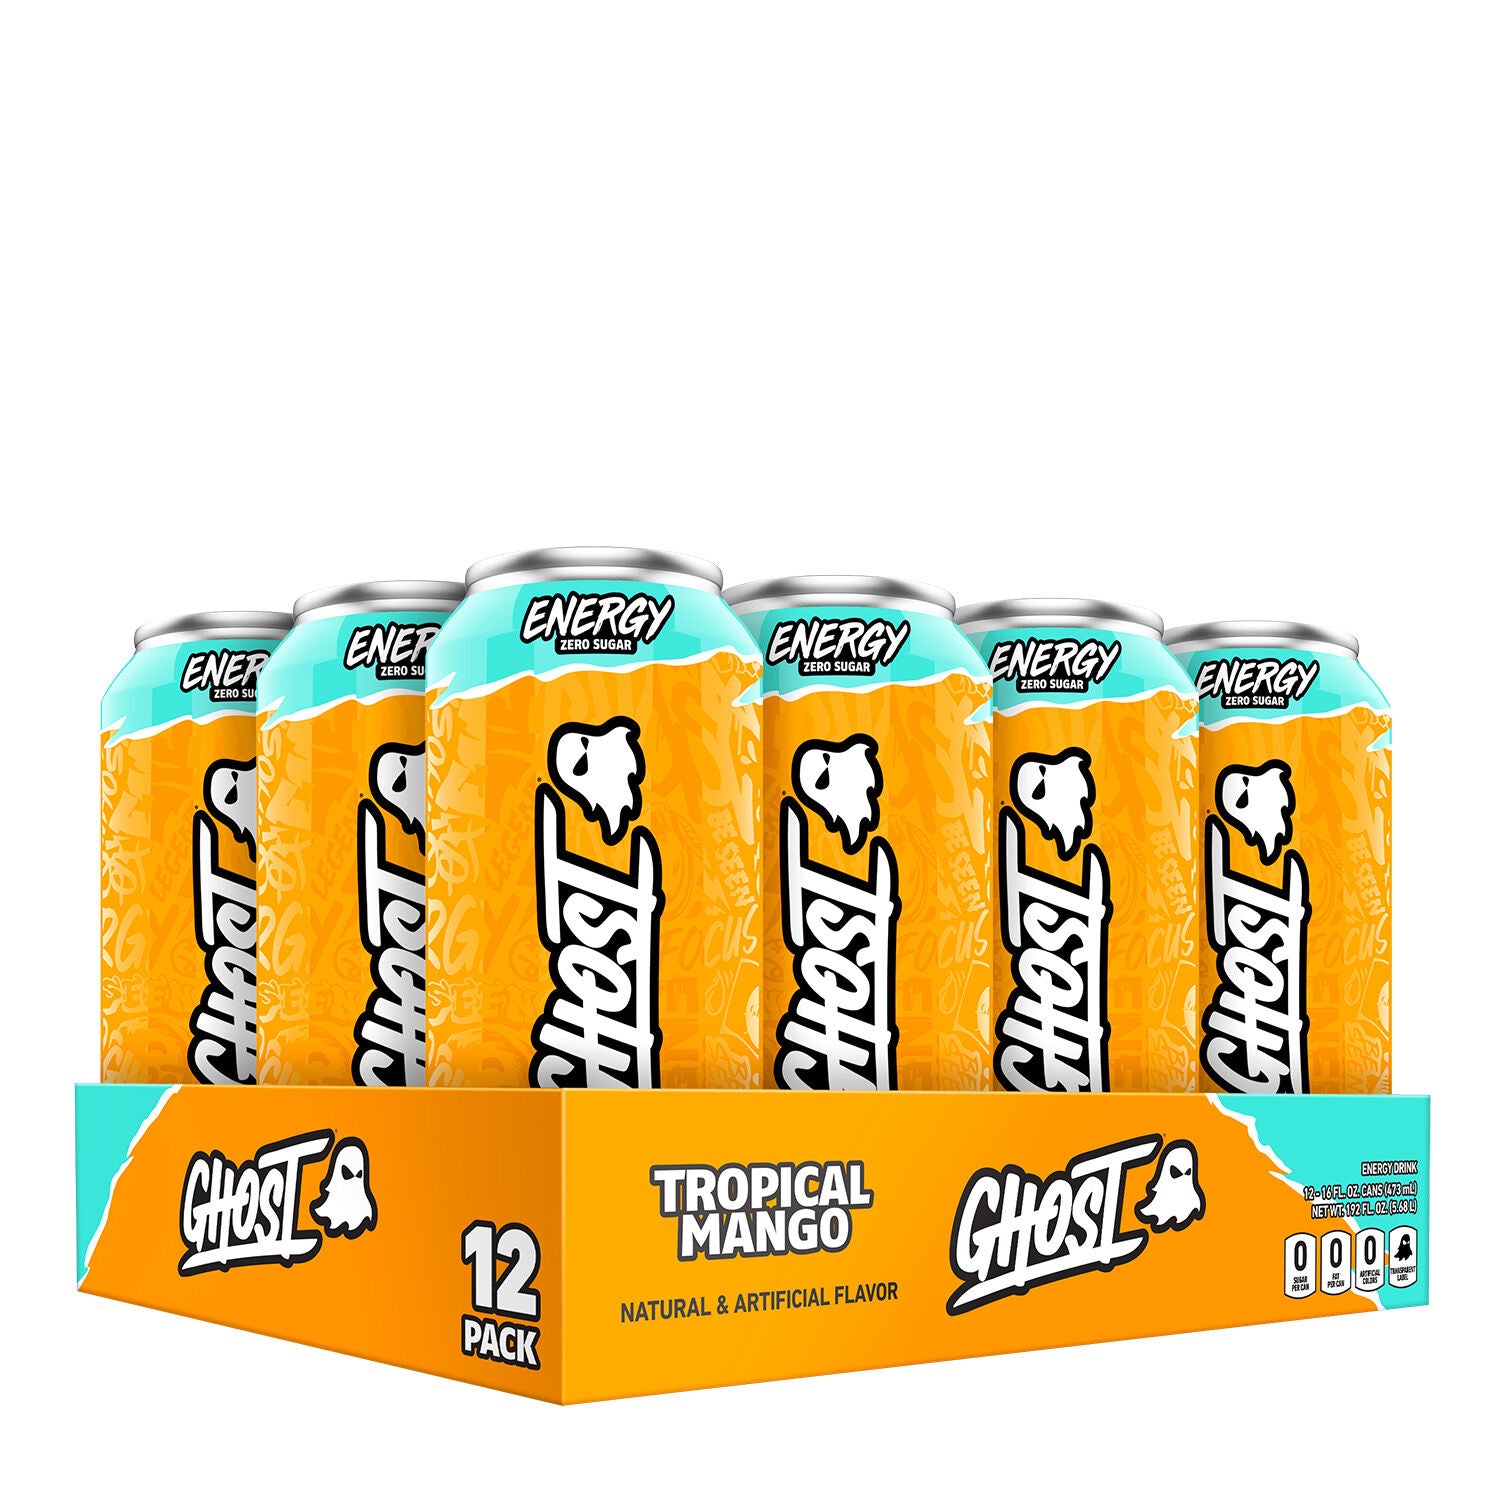 GHOST Energy Drink (1 case of 12 cans) ghost-energy-drink-1-case-of-12-cans Protein Snacks Tropical Mango GHOST